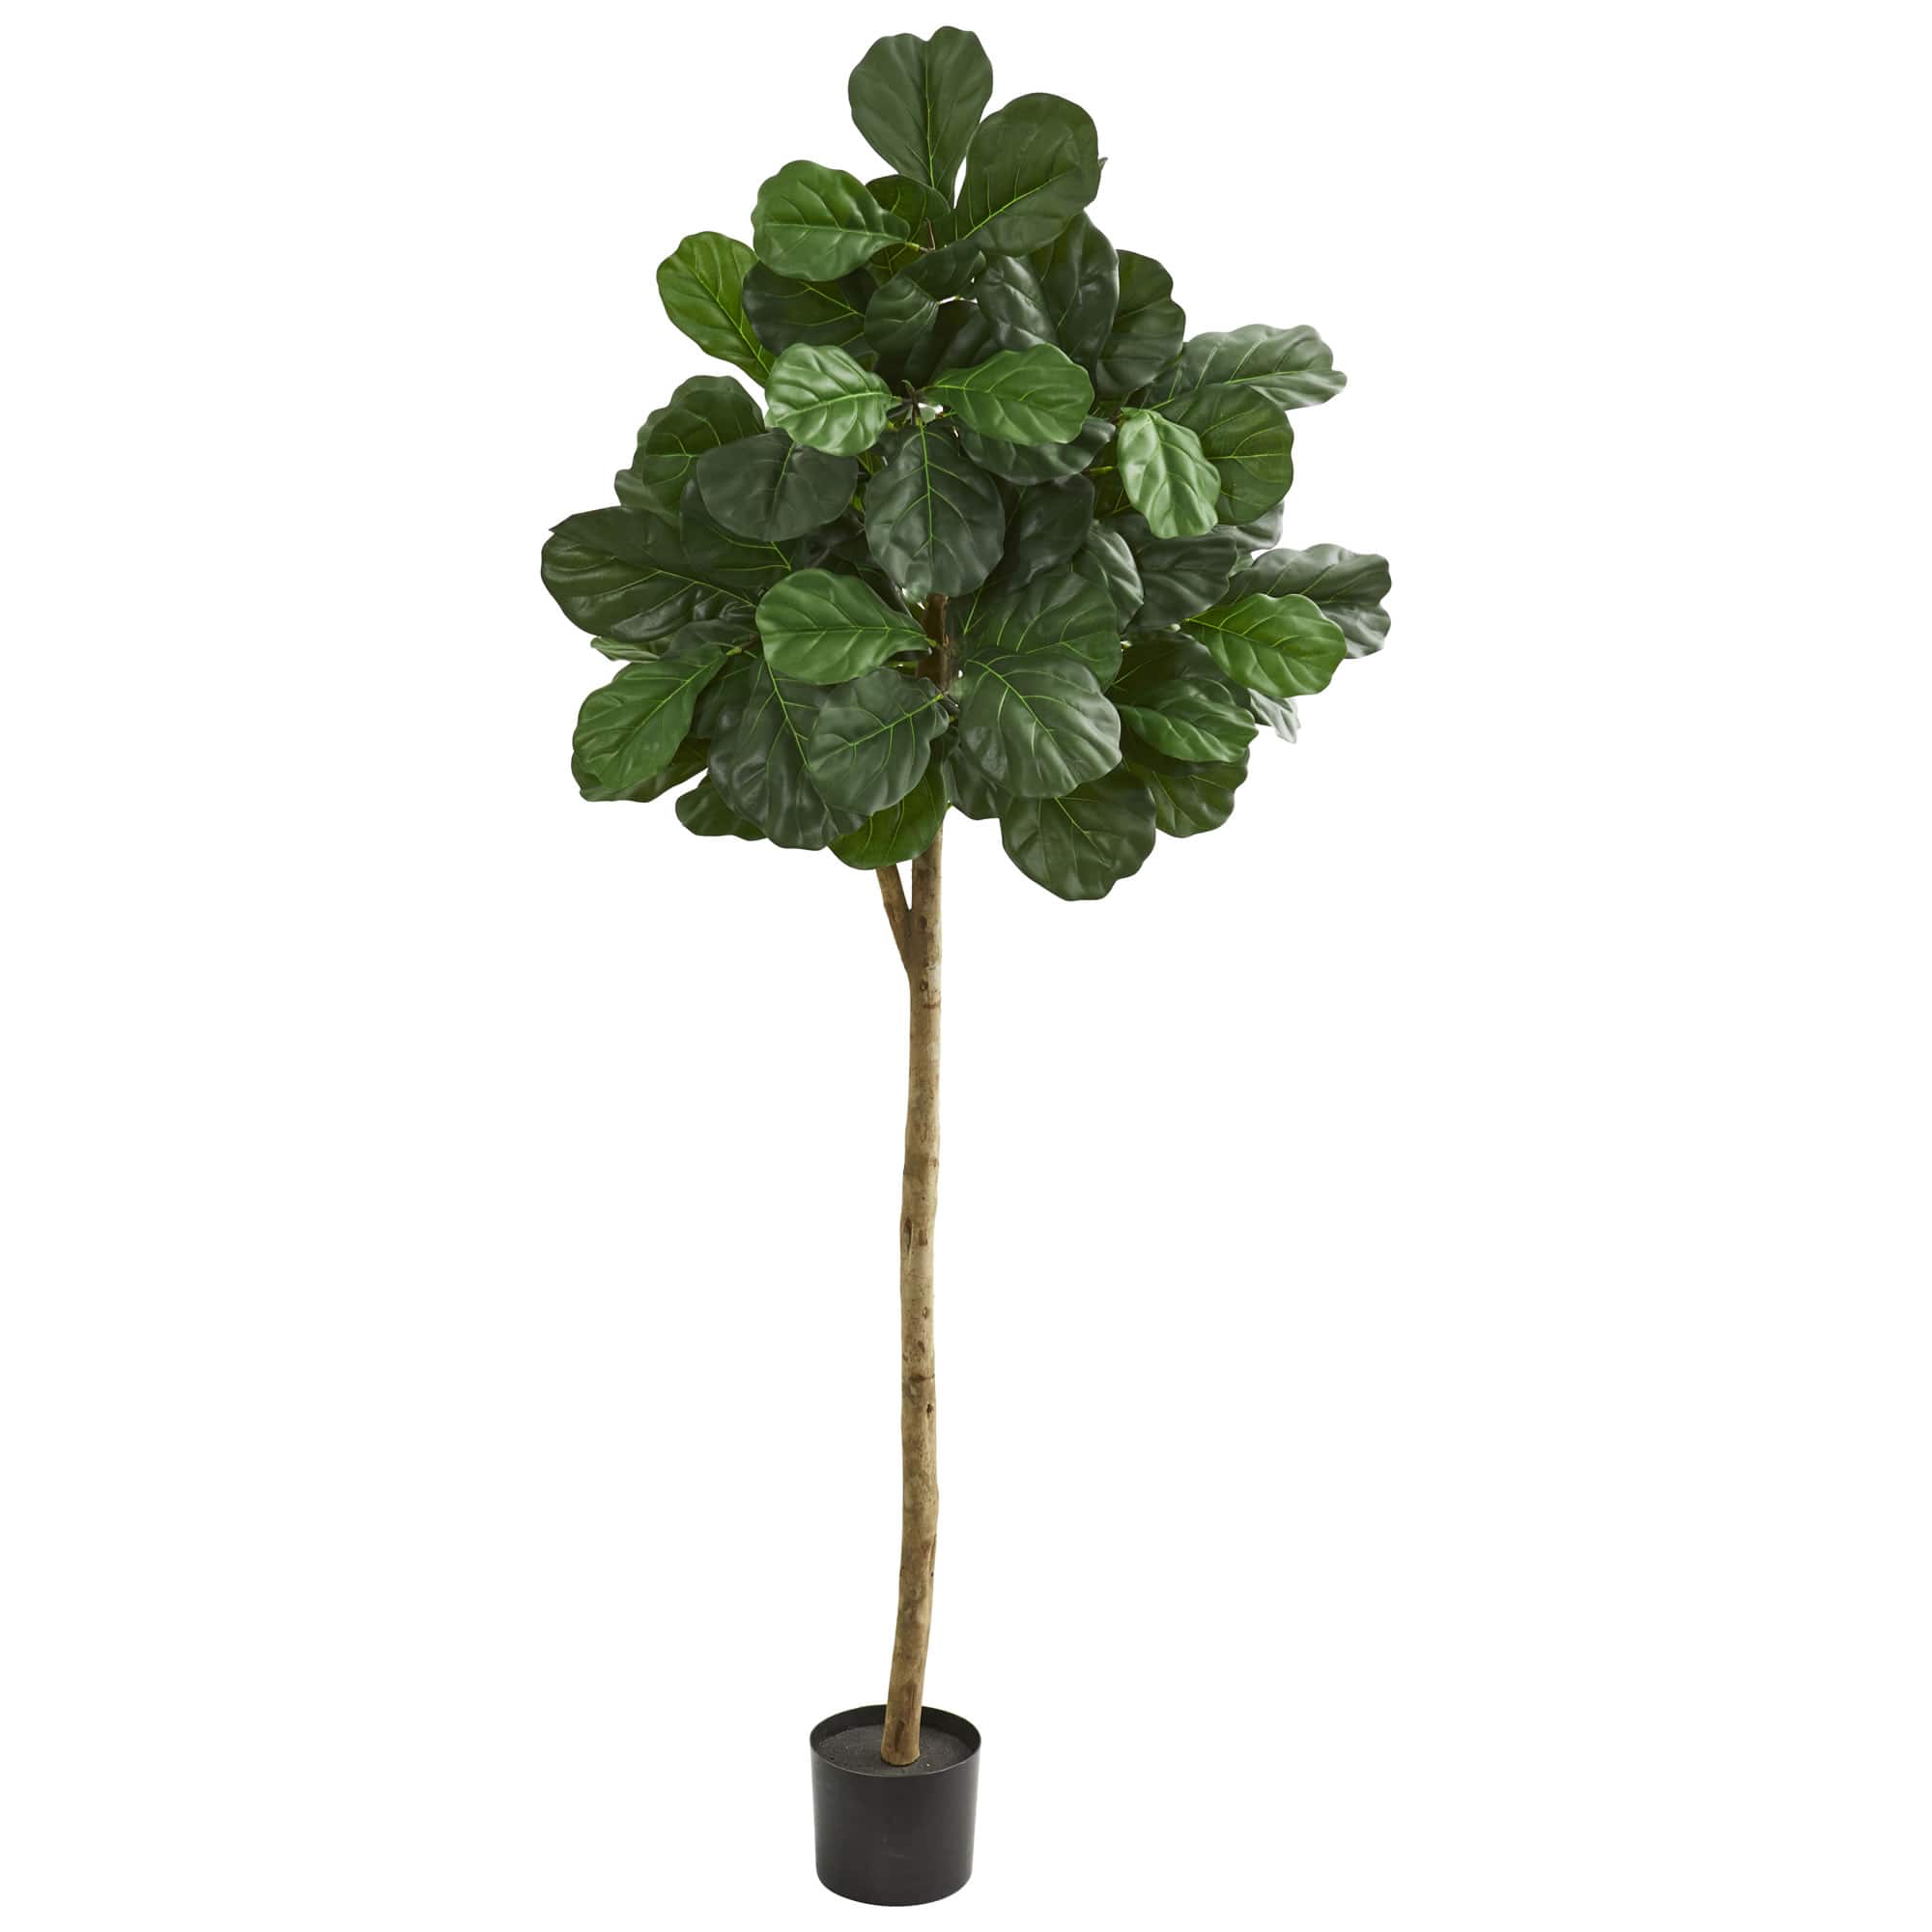 6ft. Potted Fiddle leaf Fig Artificial Tree